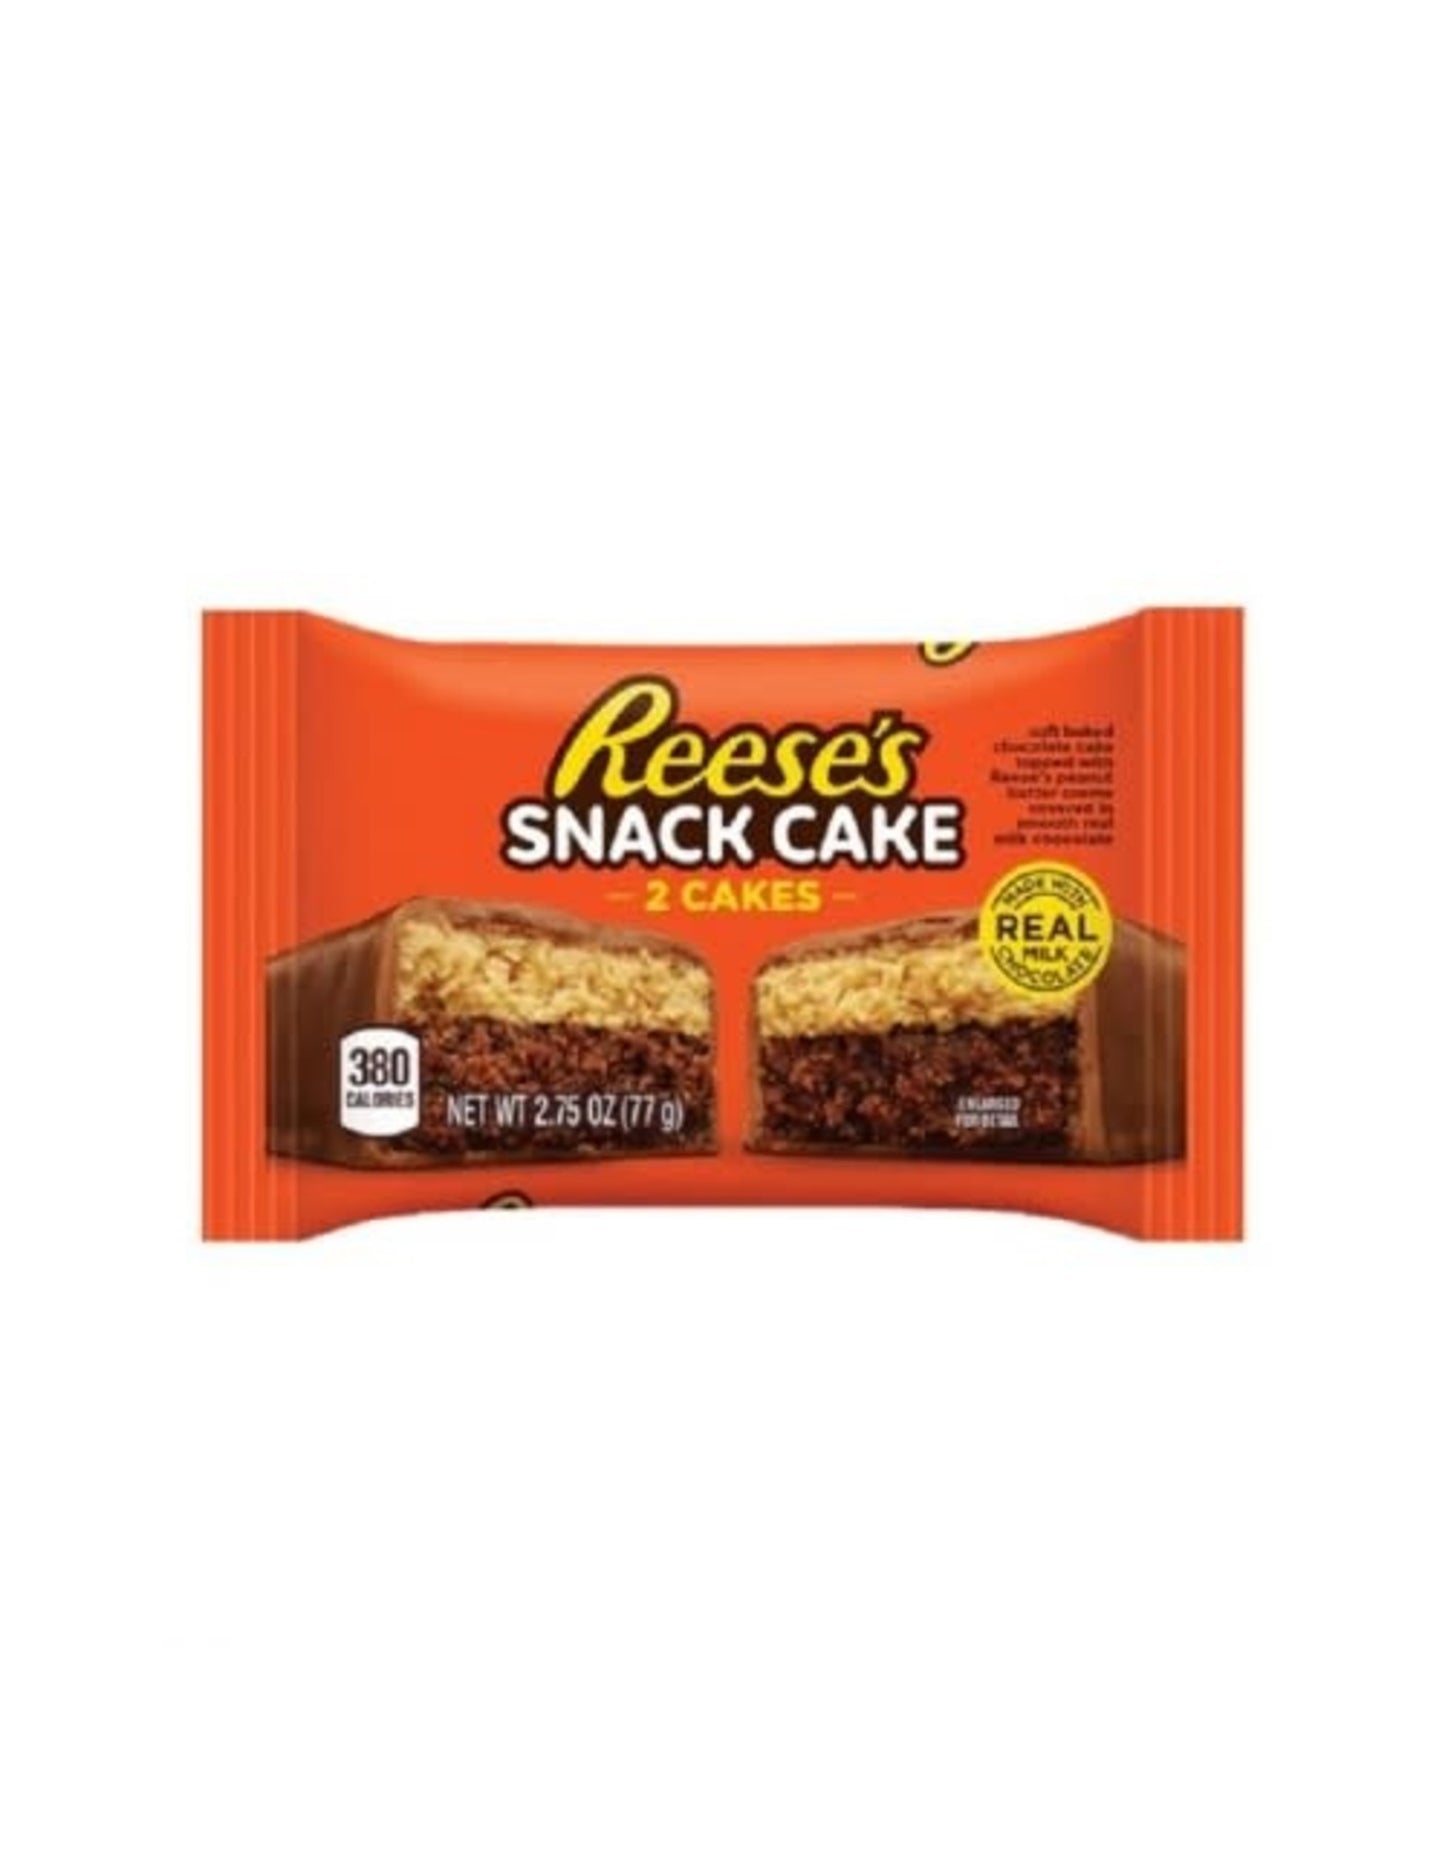 Reese's - Snack Cake